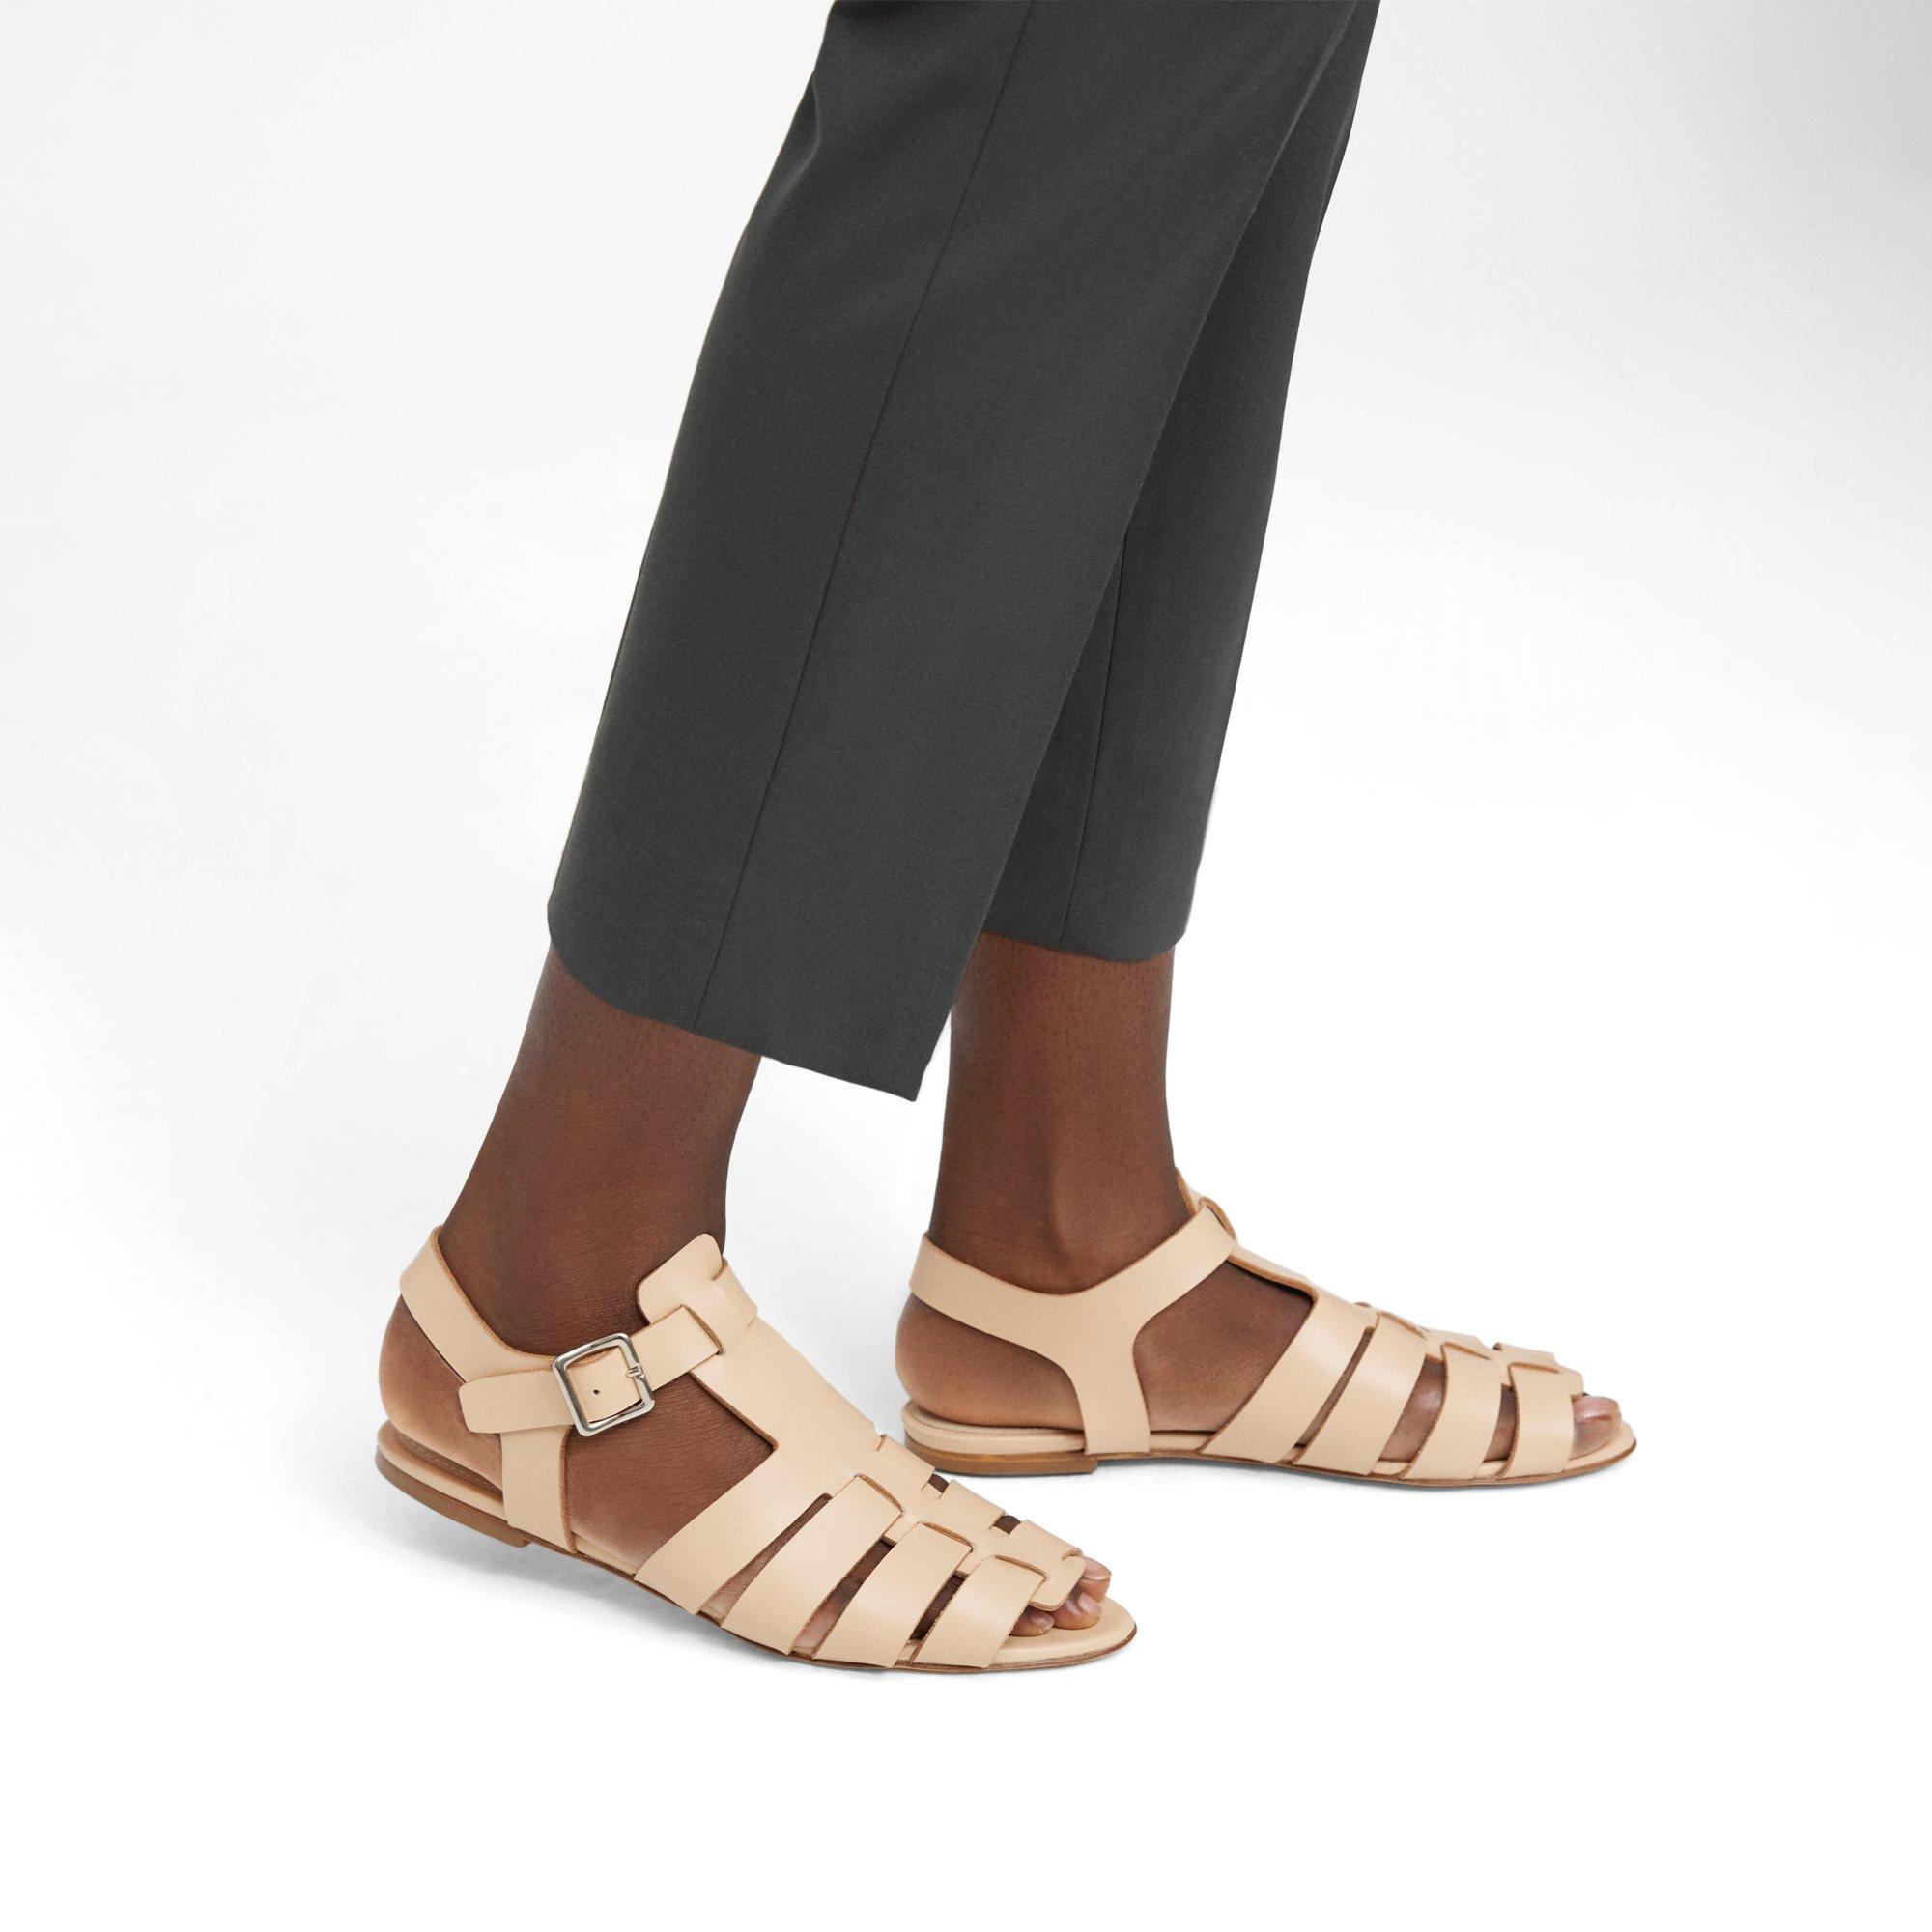 Theory Fisherman Sandal in Leather